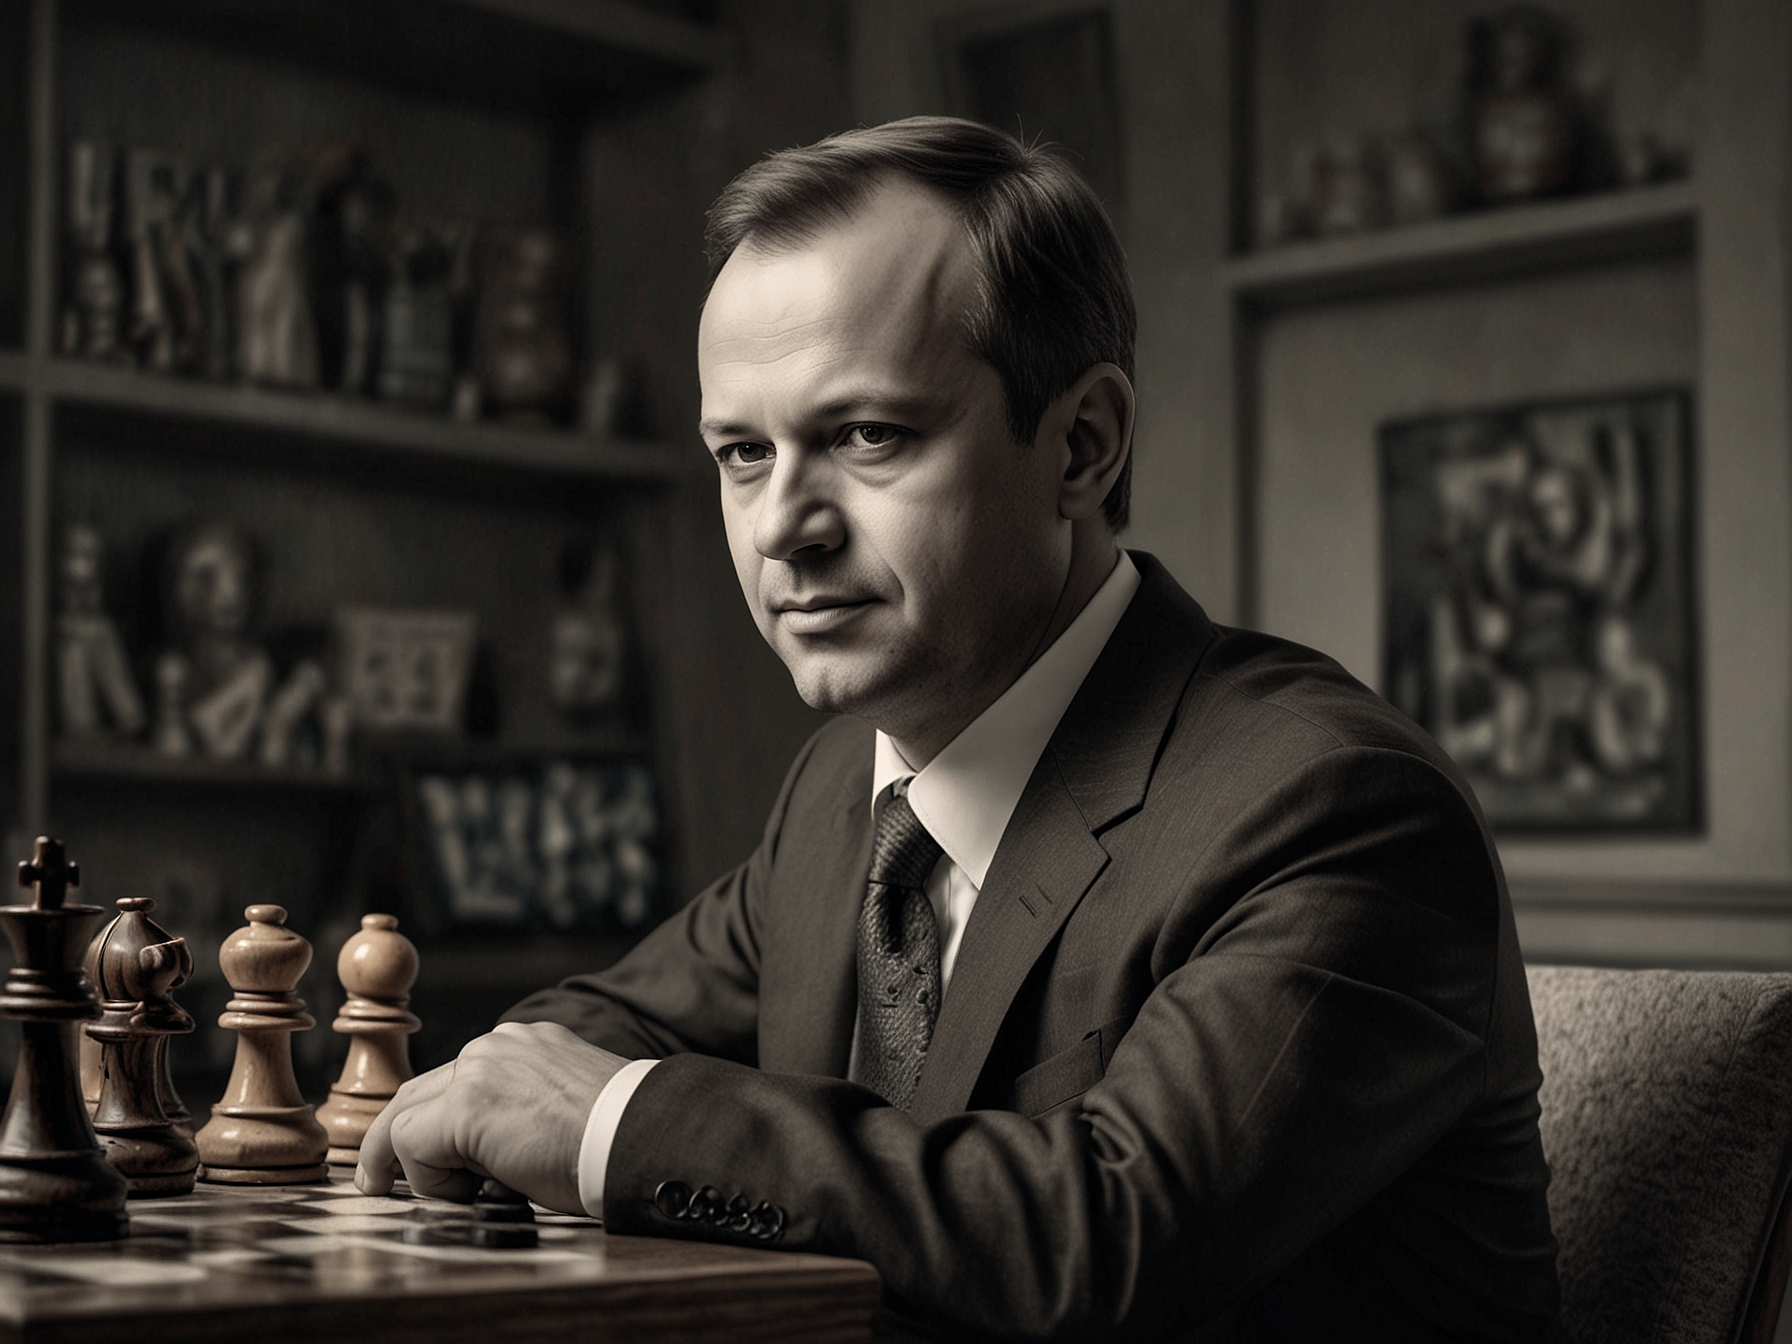 Arkady Dvorkovich speaking about the future of chess, emphasizing the importance of inclusivity, female participation, and the global expansion of the game.